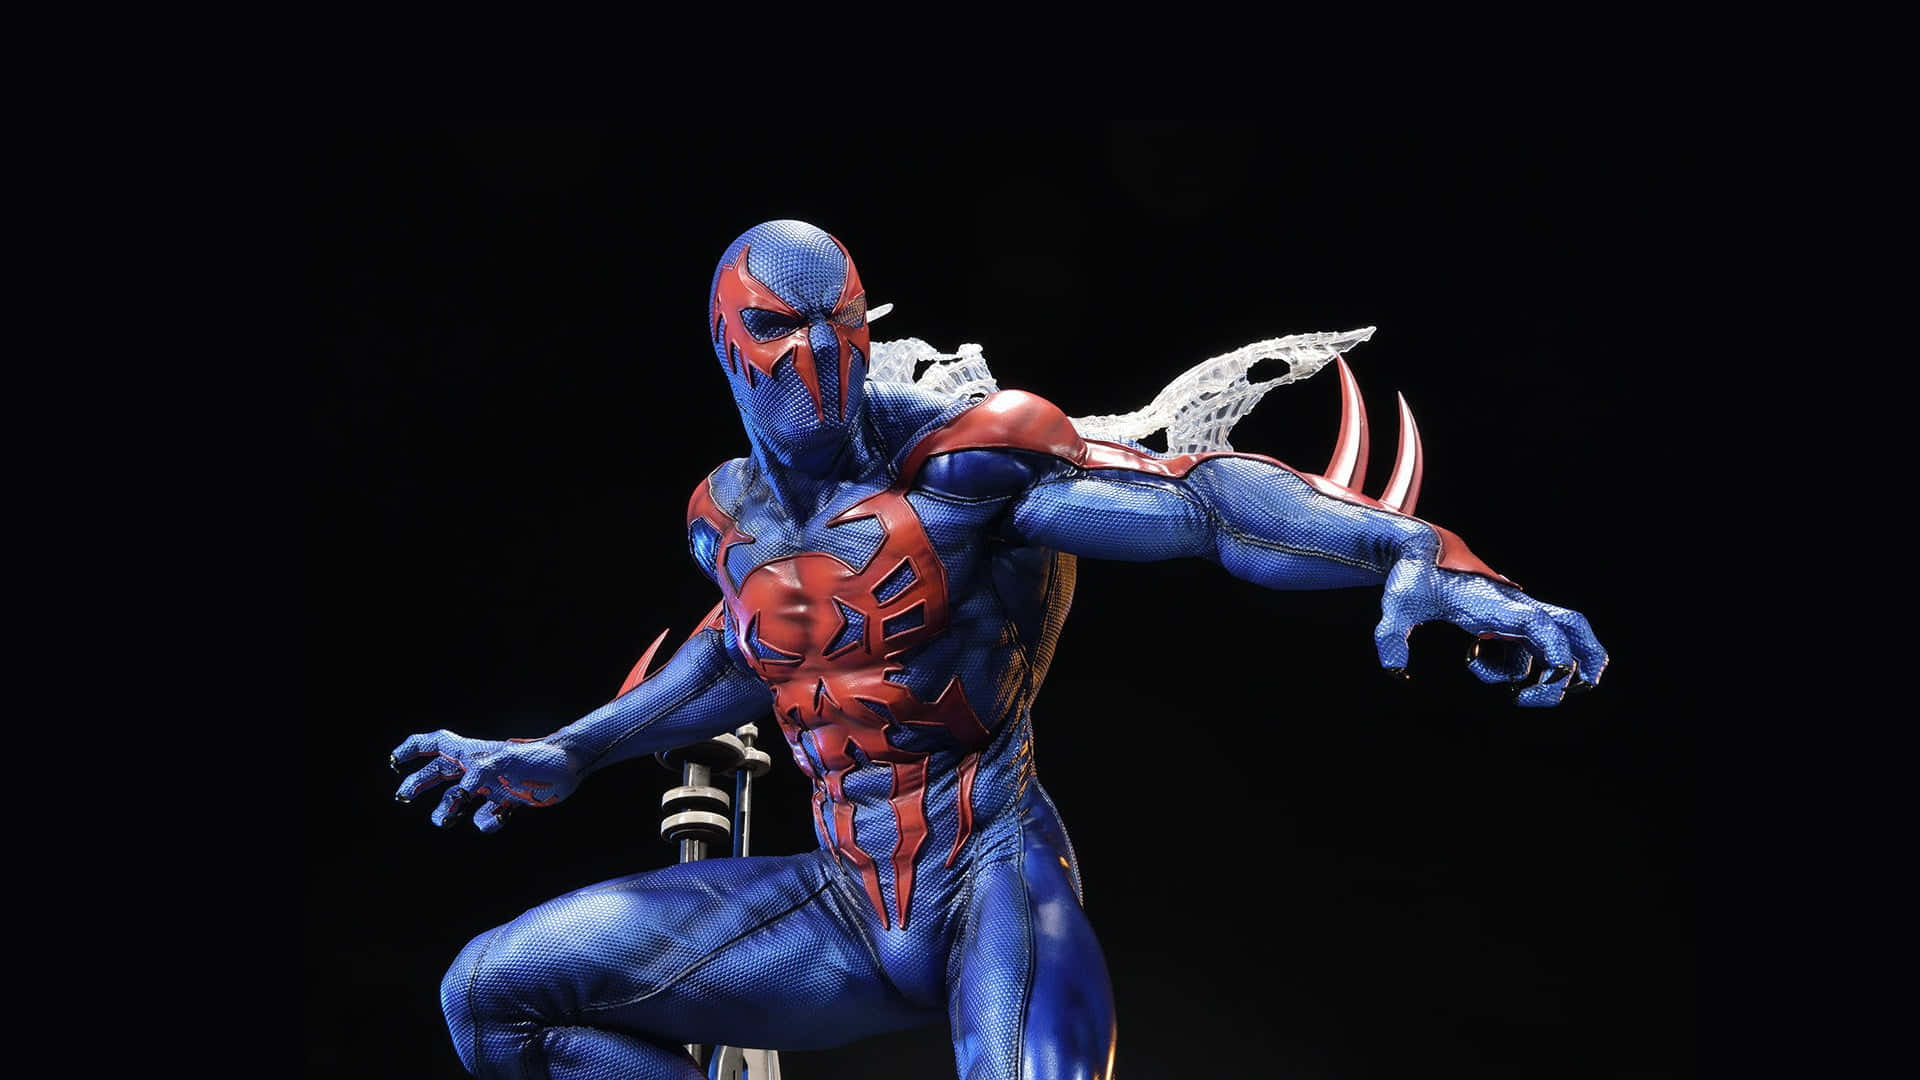 Spider-Man 2099 Swinging into Action Wallpaper